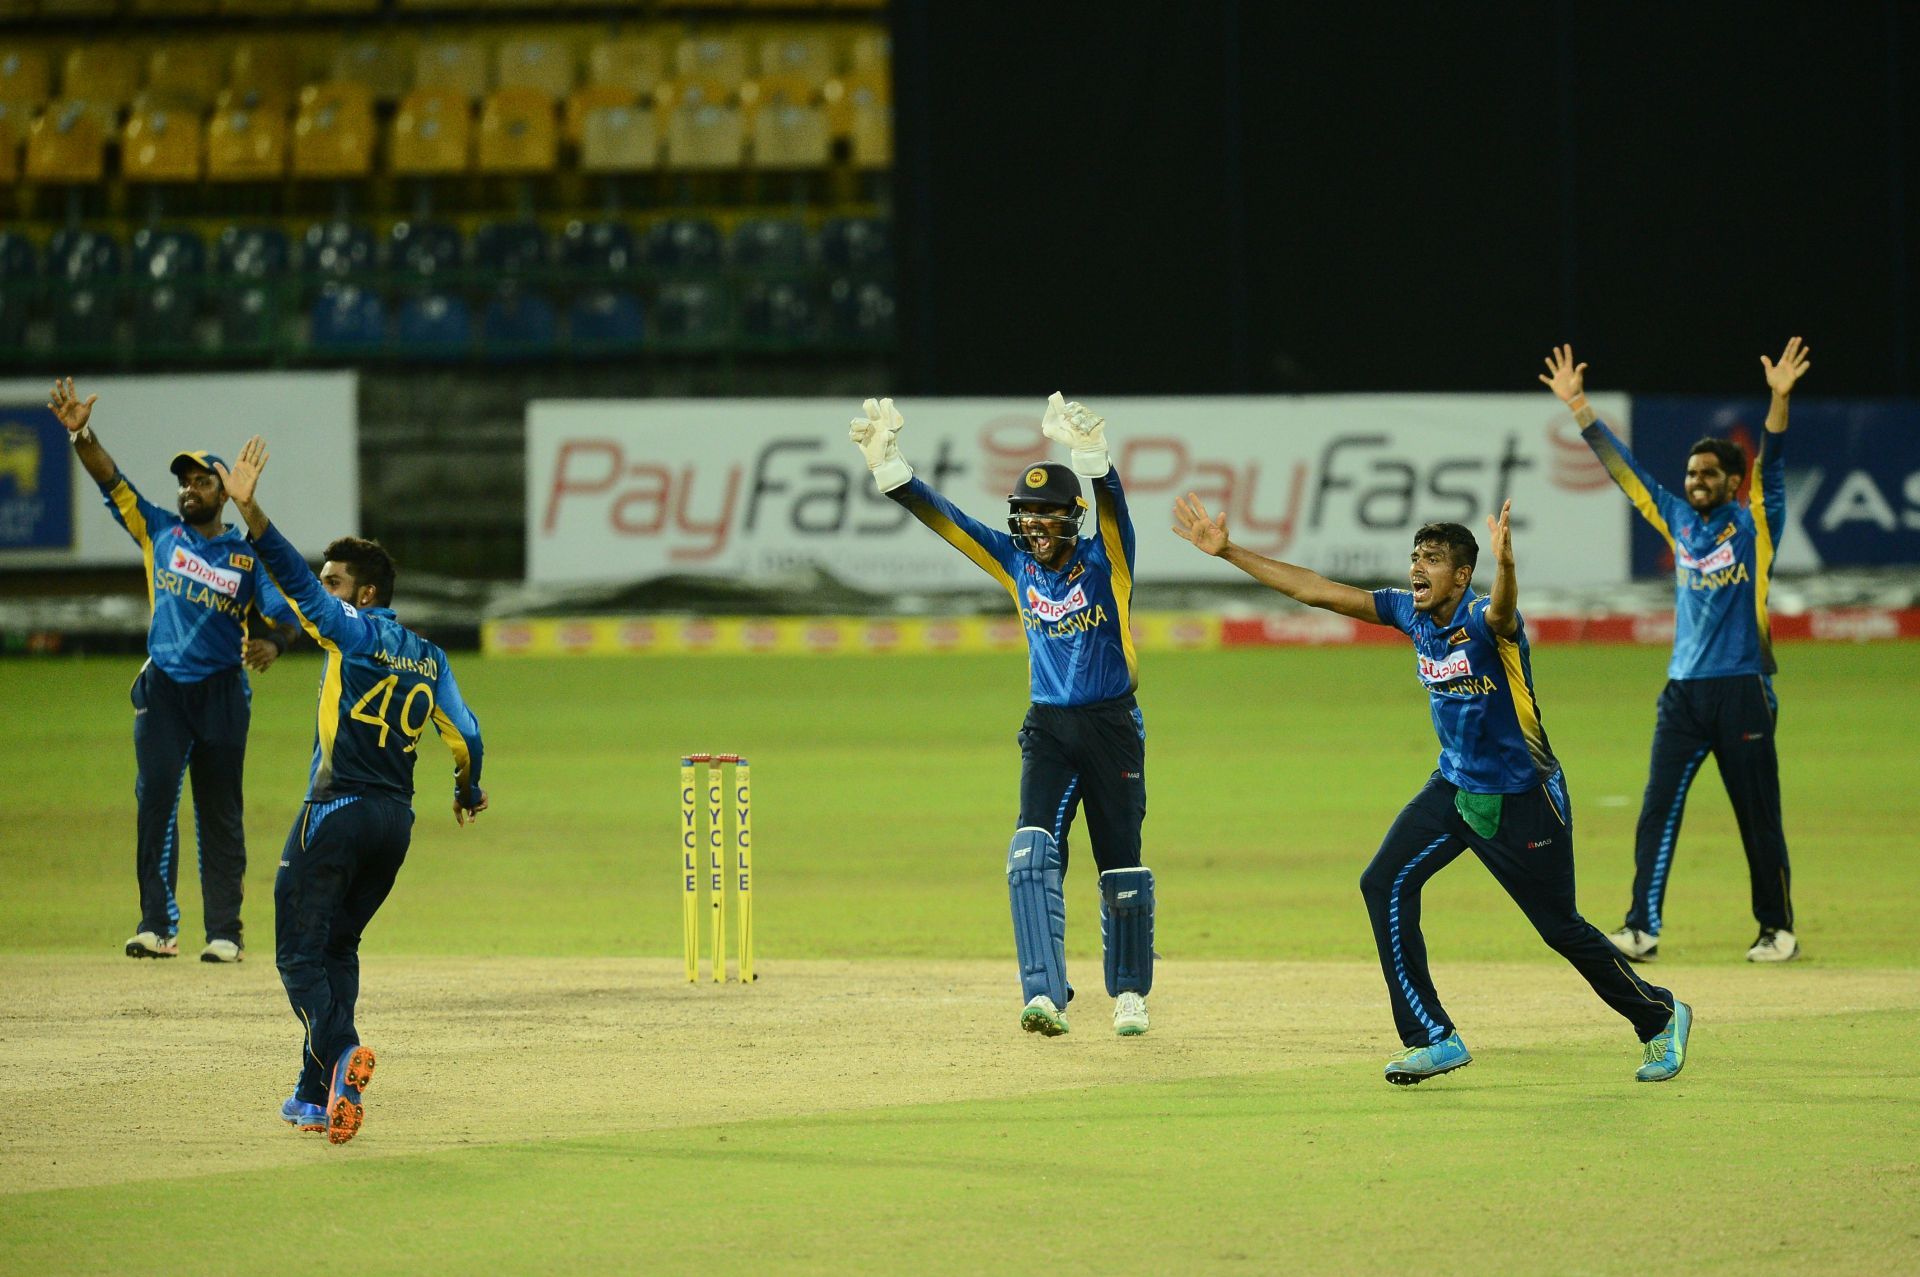 Sri Lanka are ranked 10 in the ICC T20 Rankings.